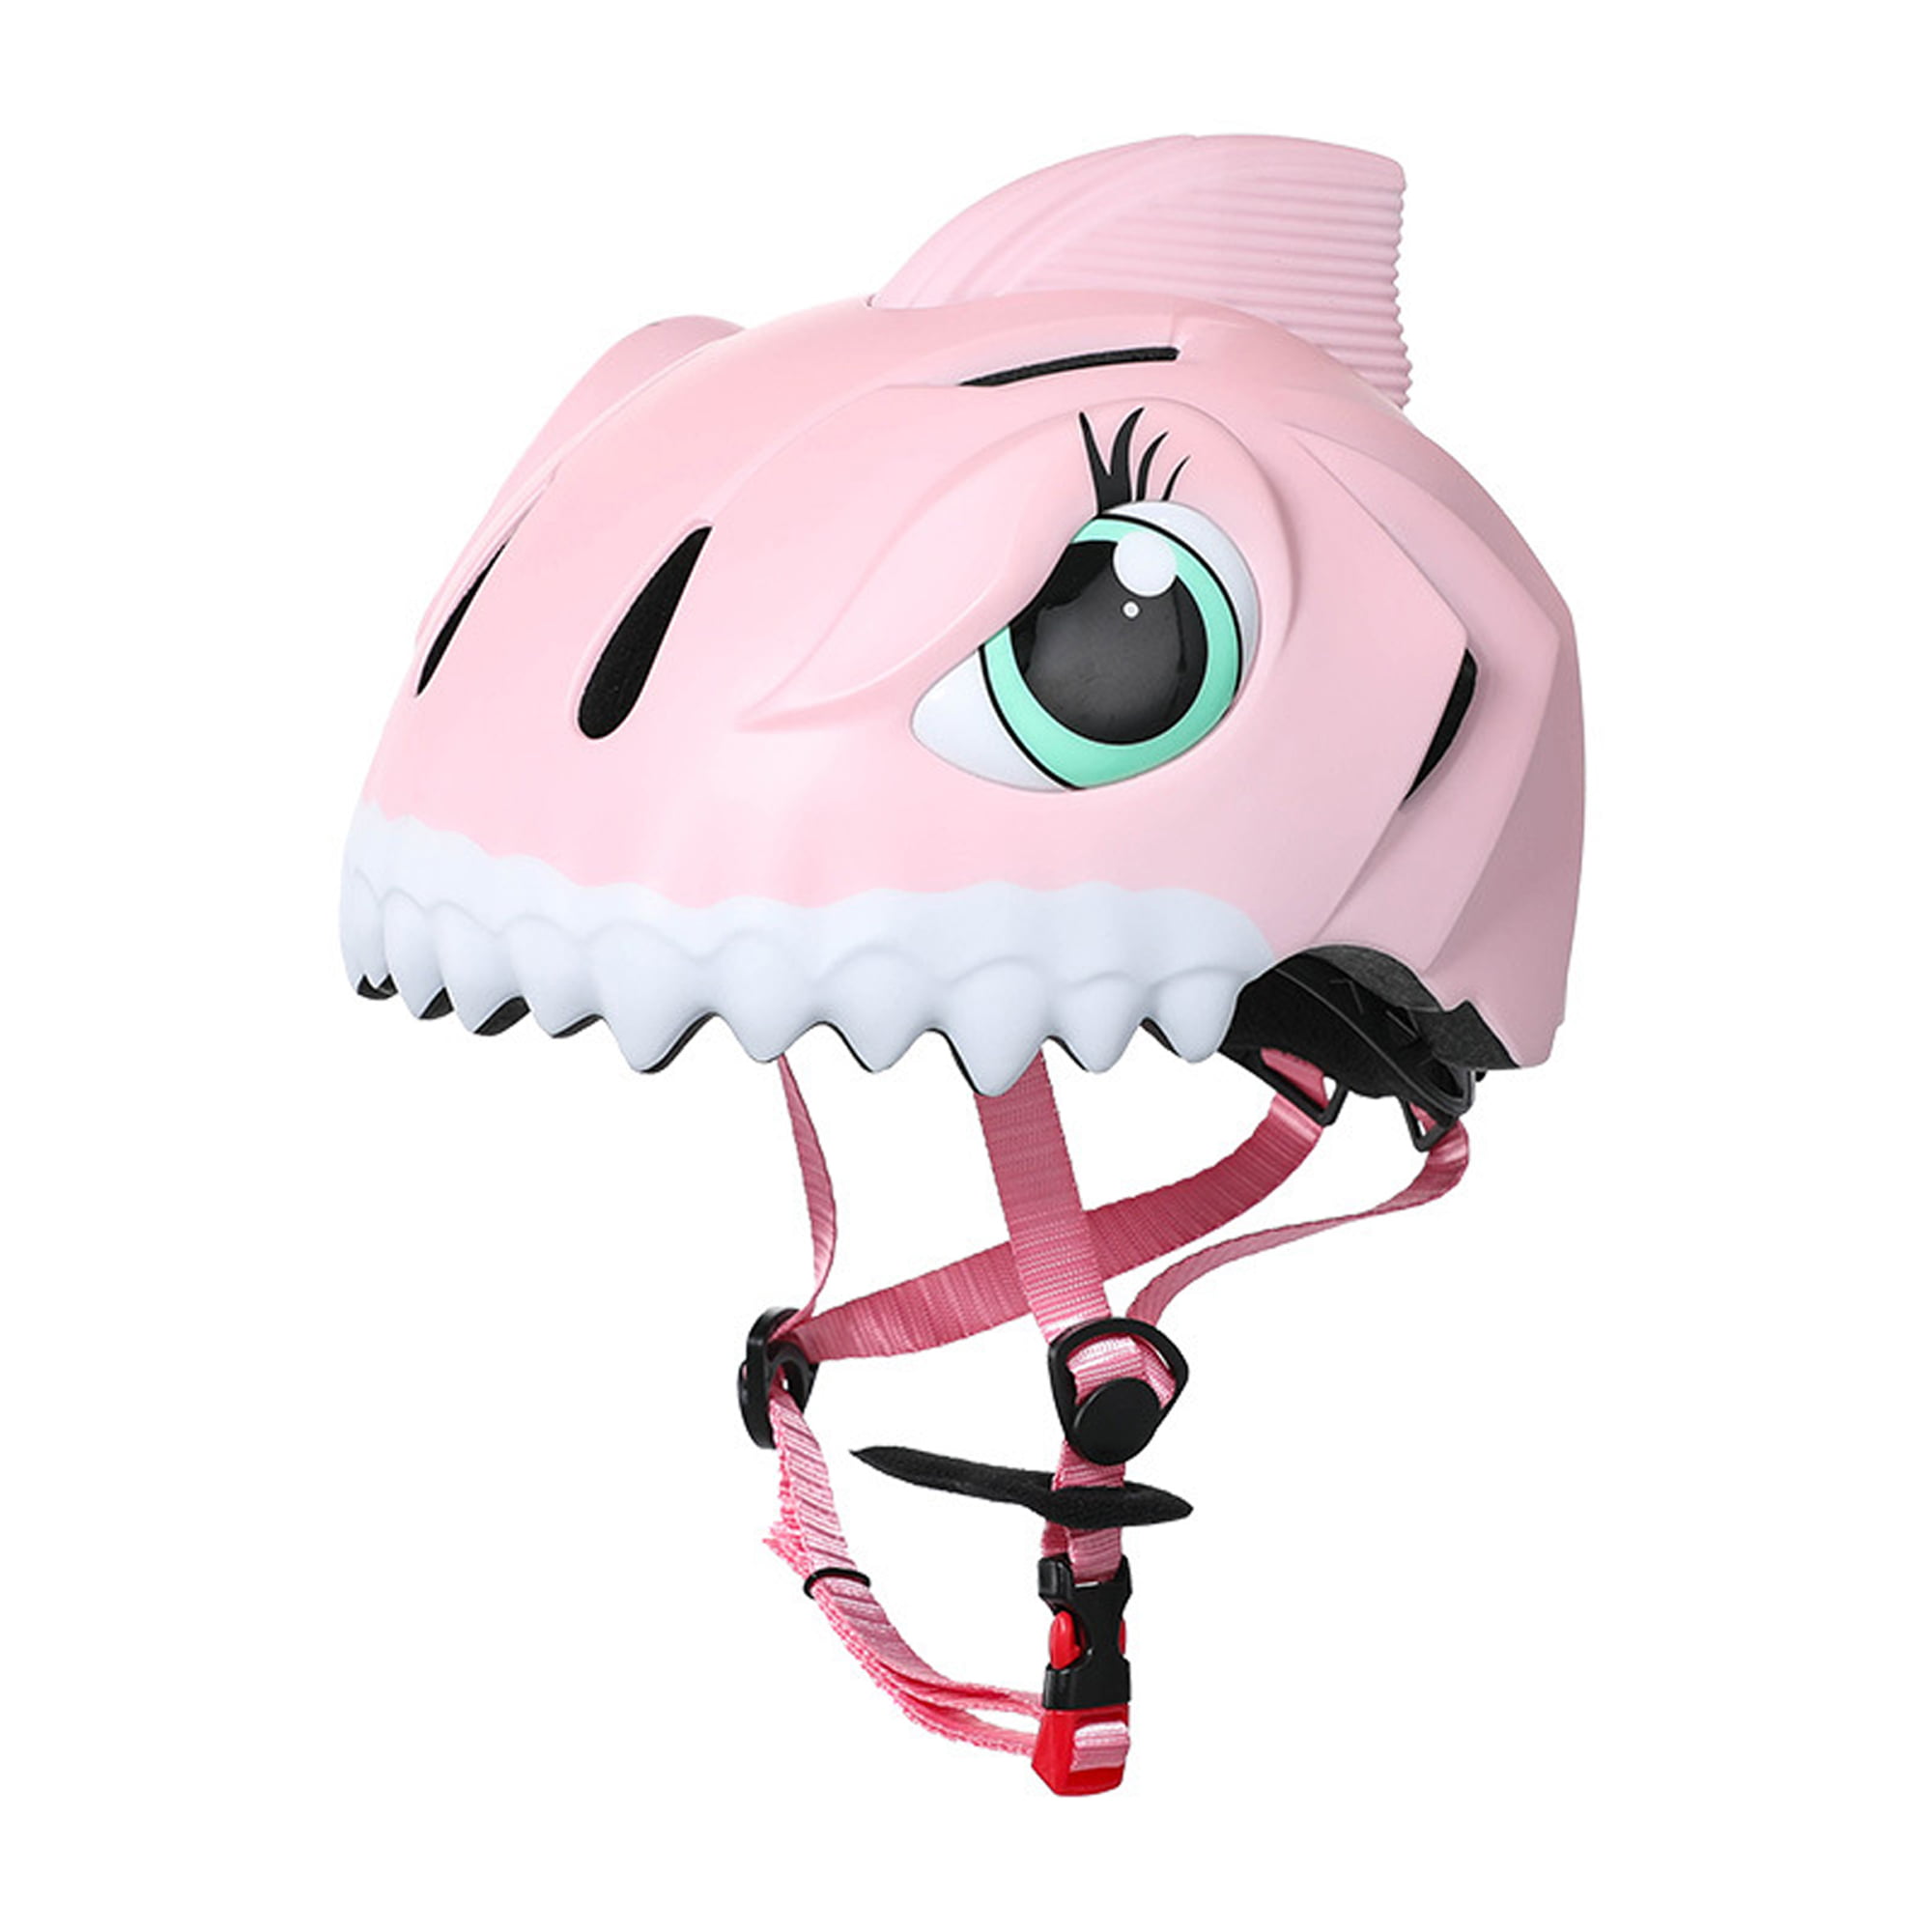 BARBIE CYCLE/SCOOTER SAFETY HELMET MY FAB BEAUTY GIRLS SET SIZE 46-52cm 